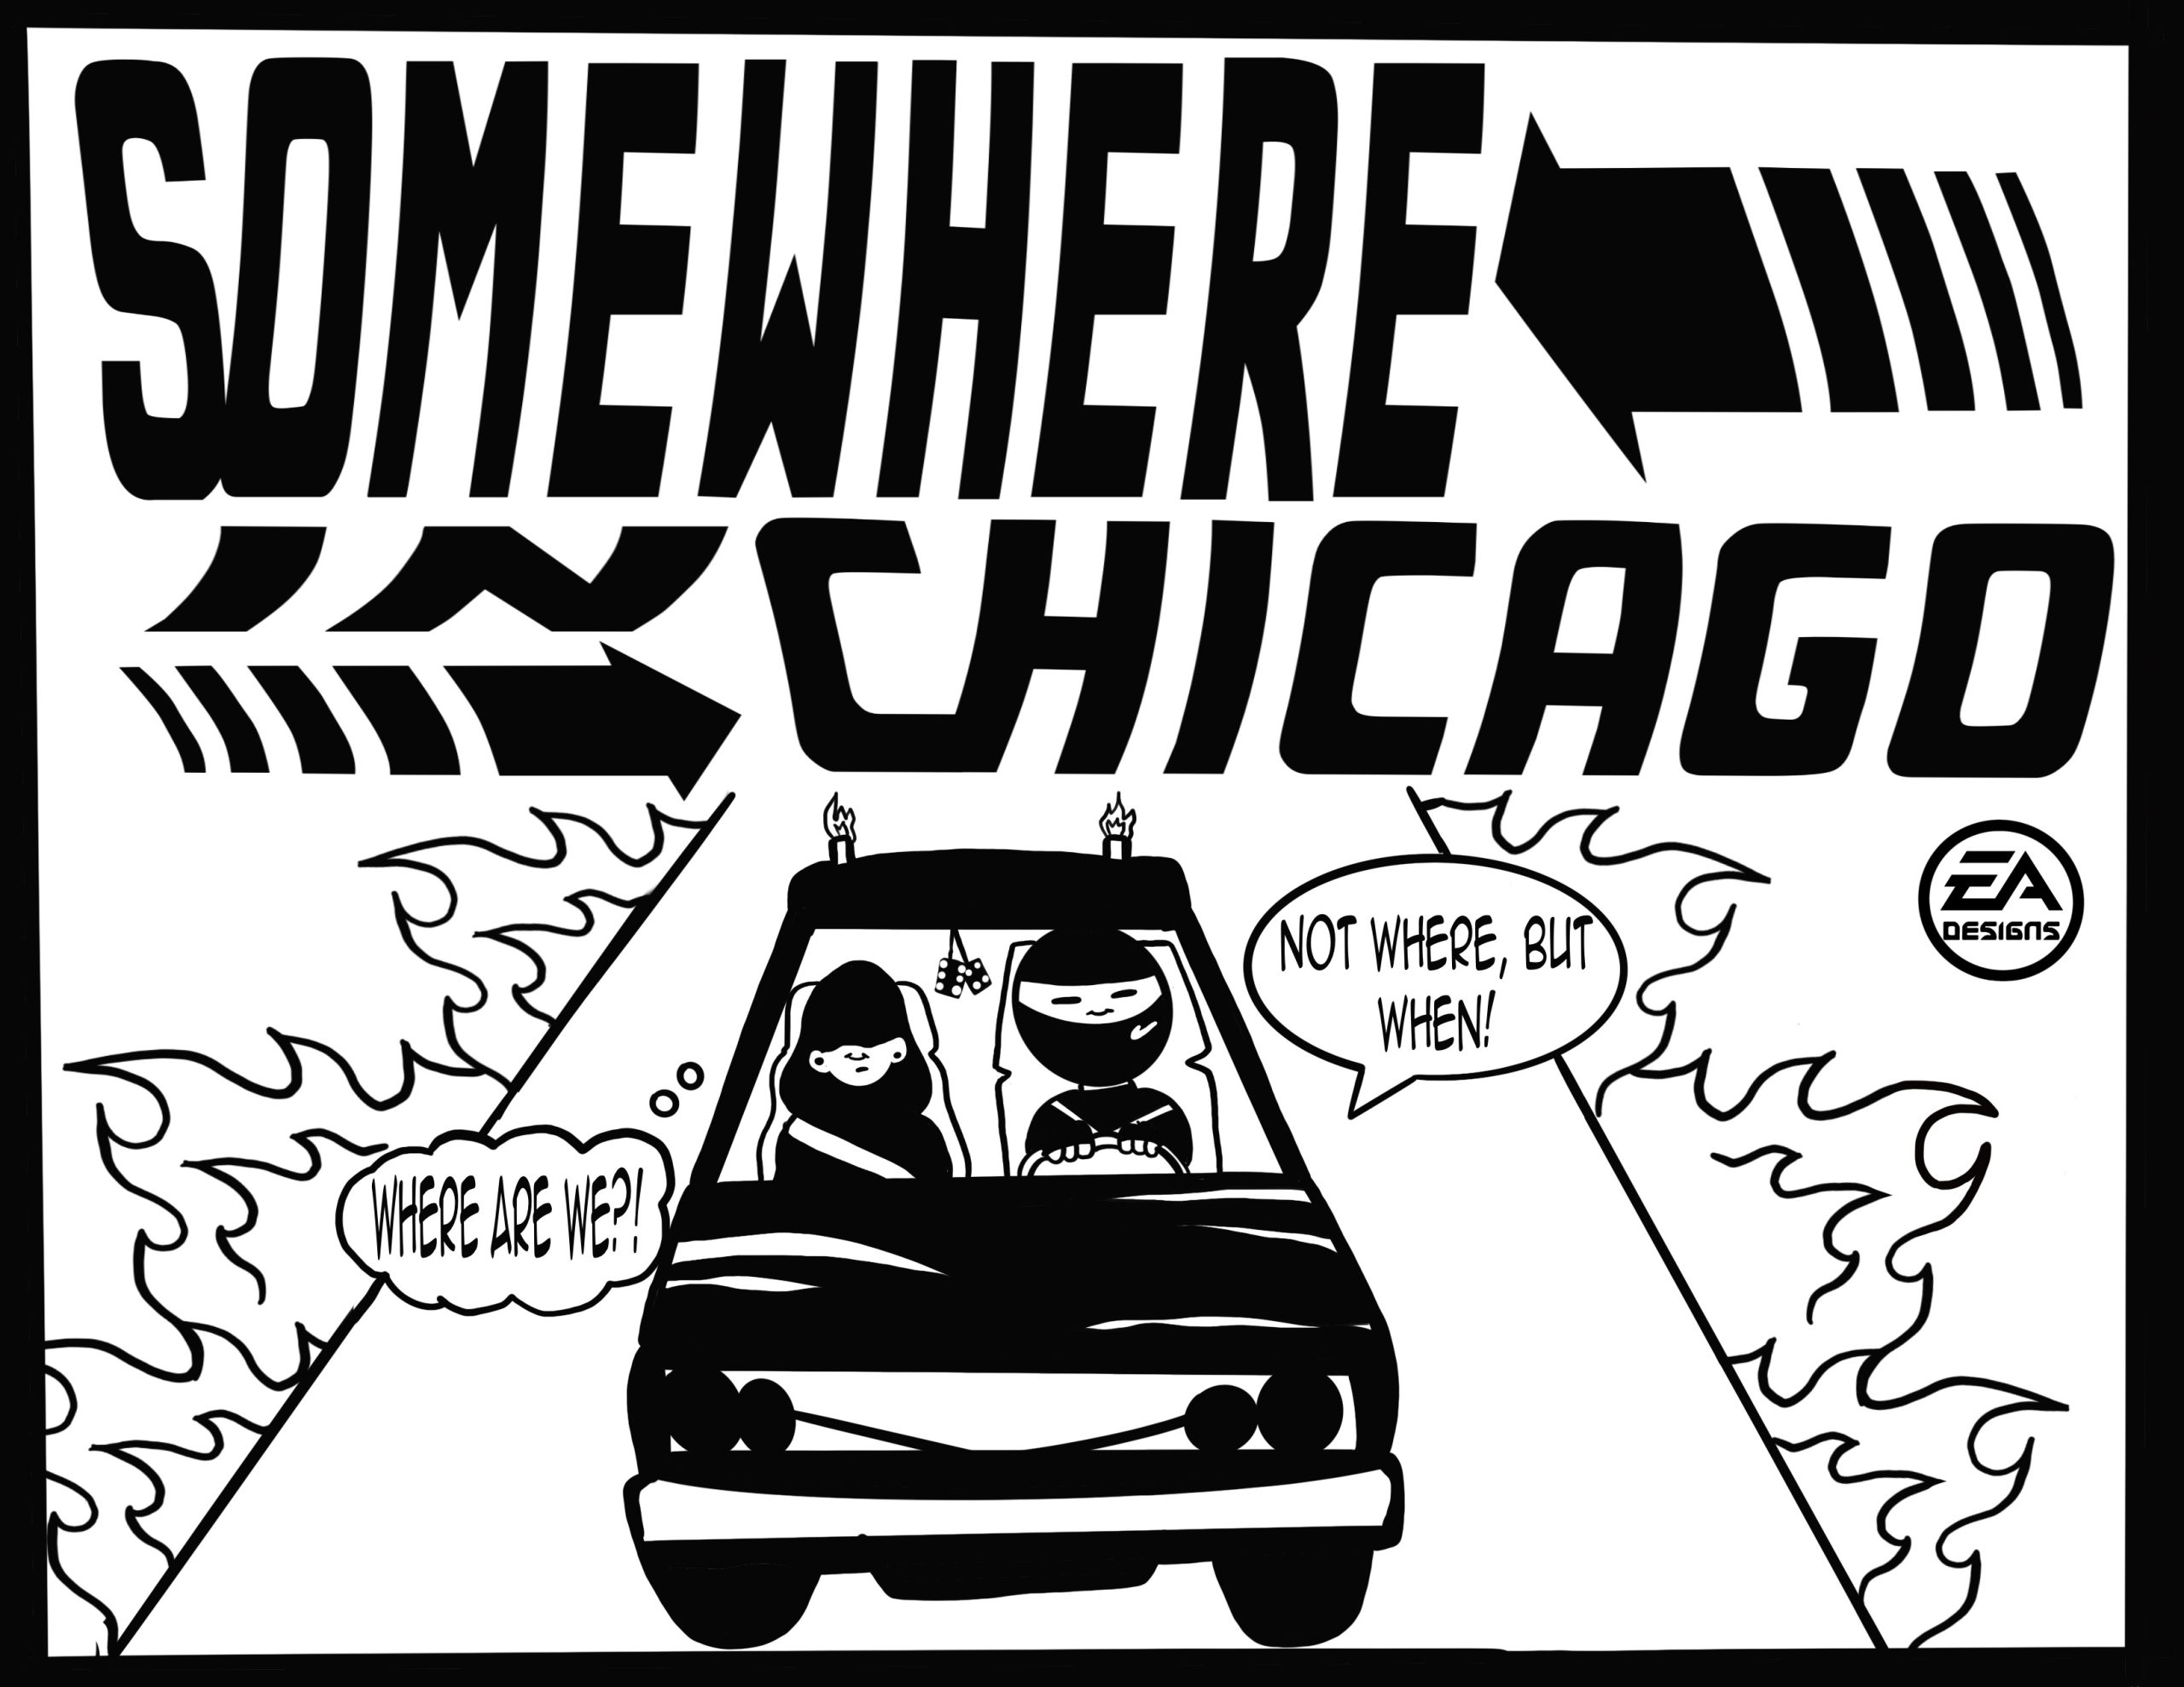 Spread the Knowledge: a “Somewhere In Chicago” Story